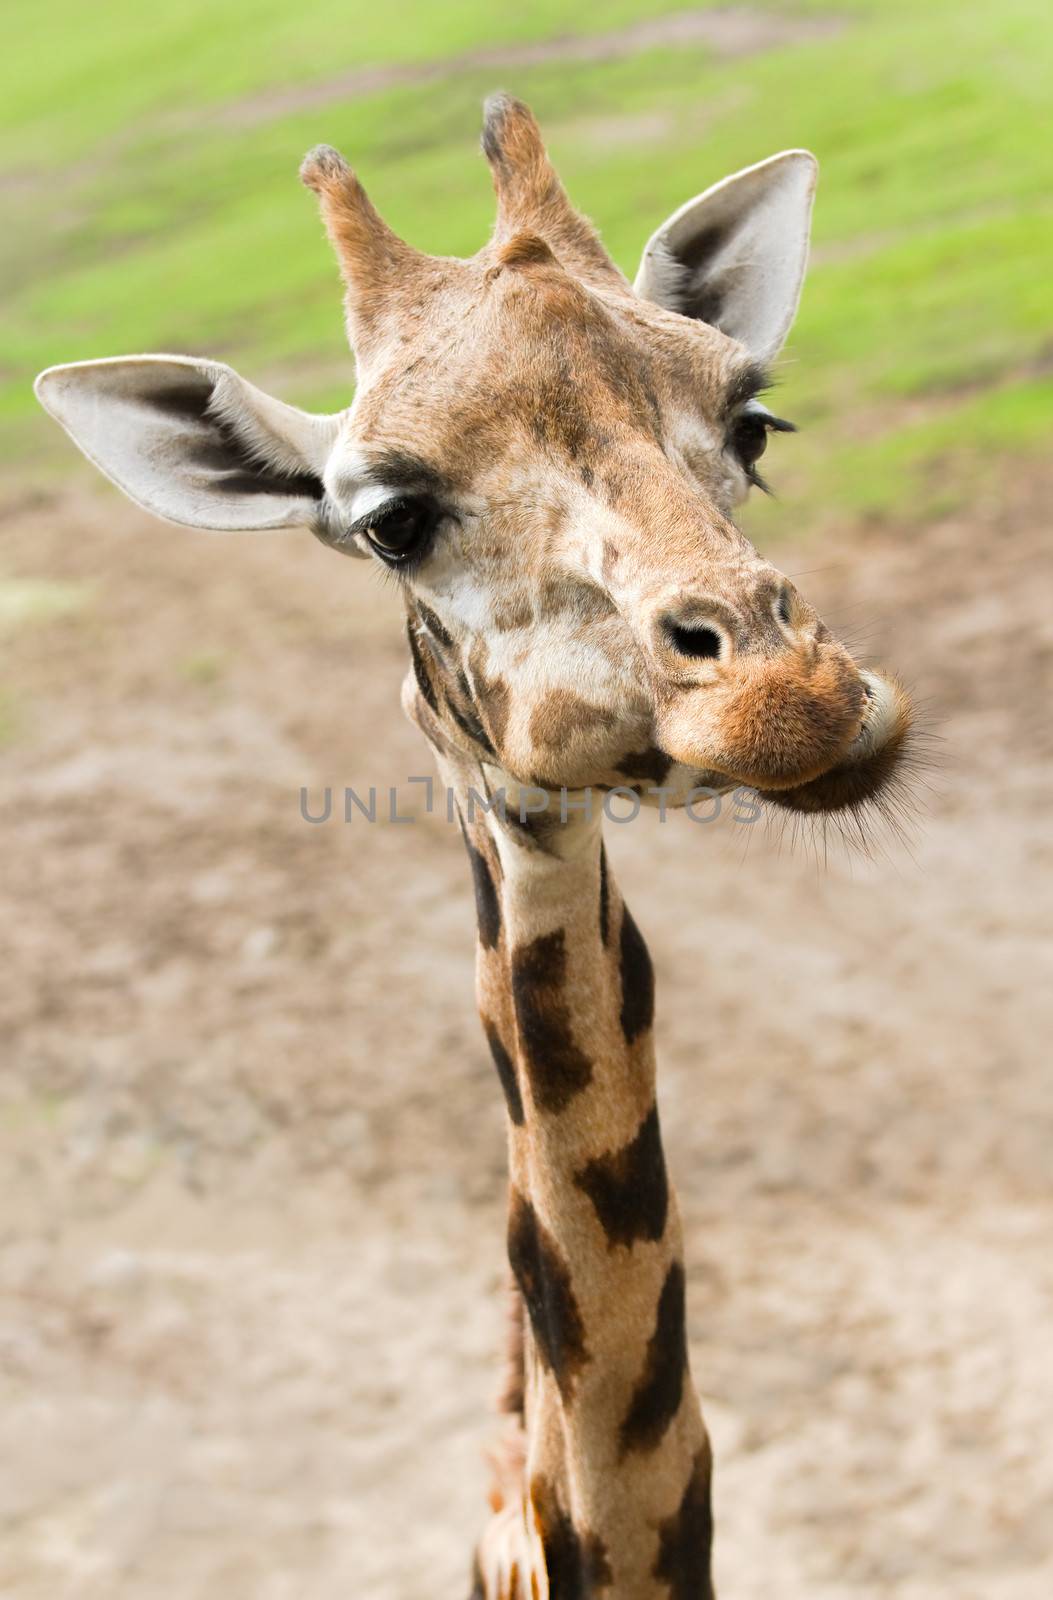 Funny giraffe in close view by Colette